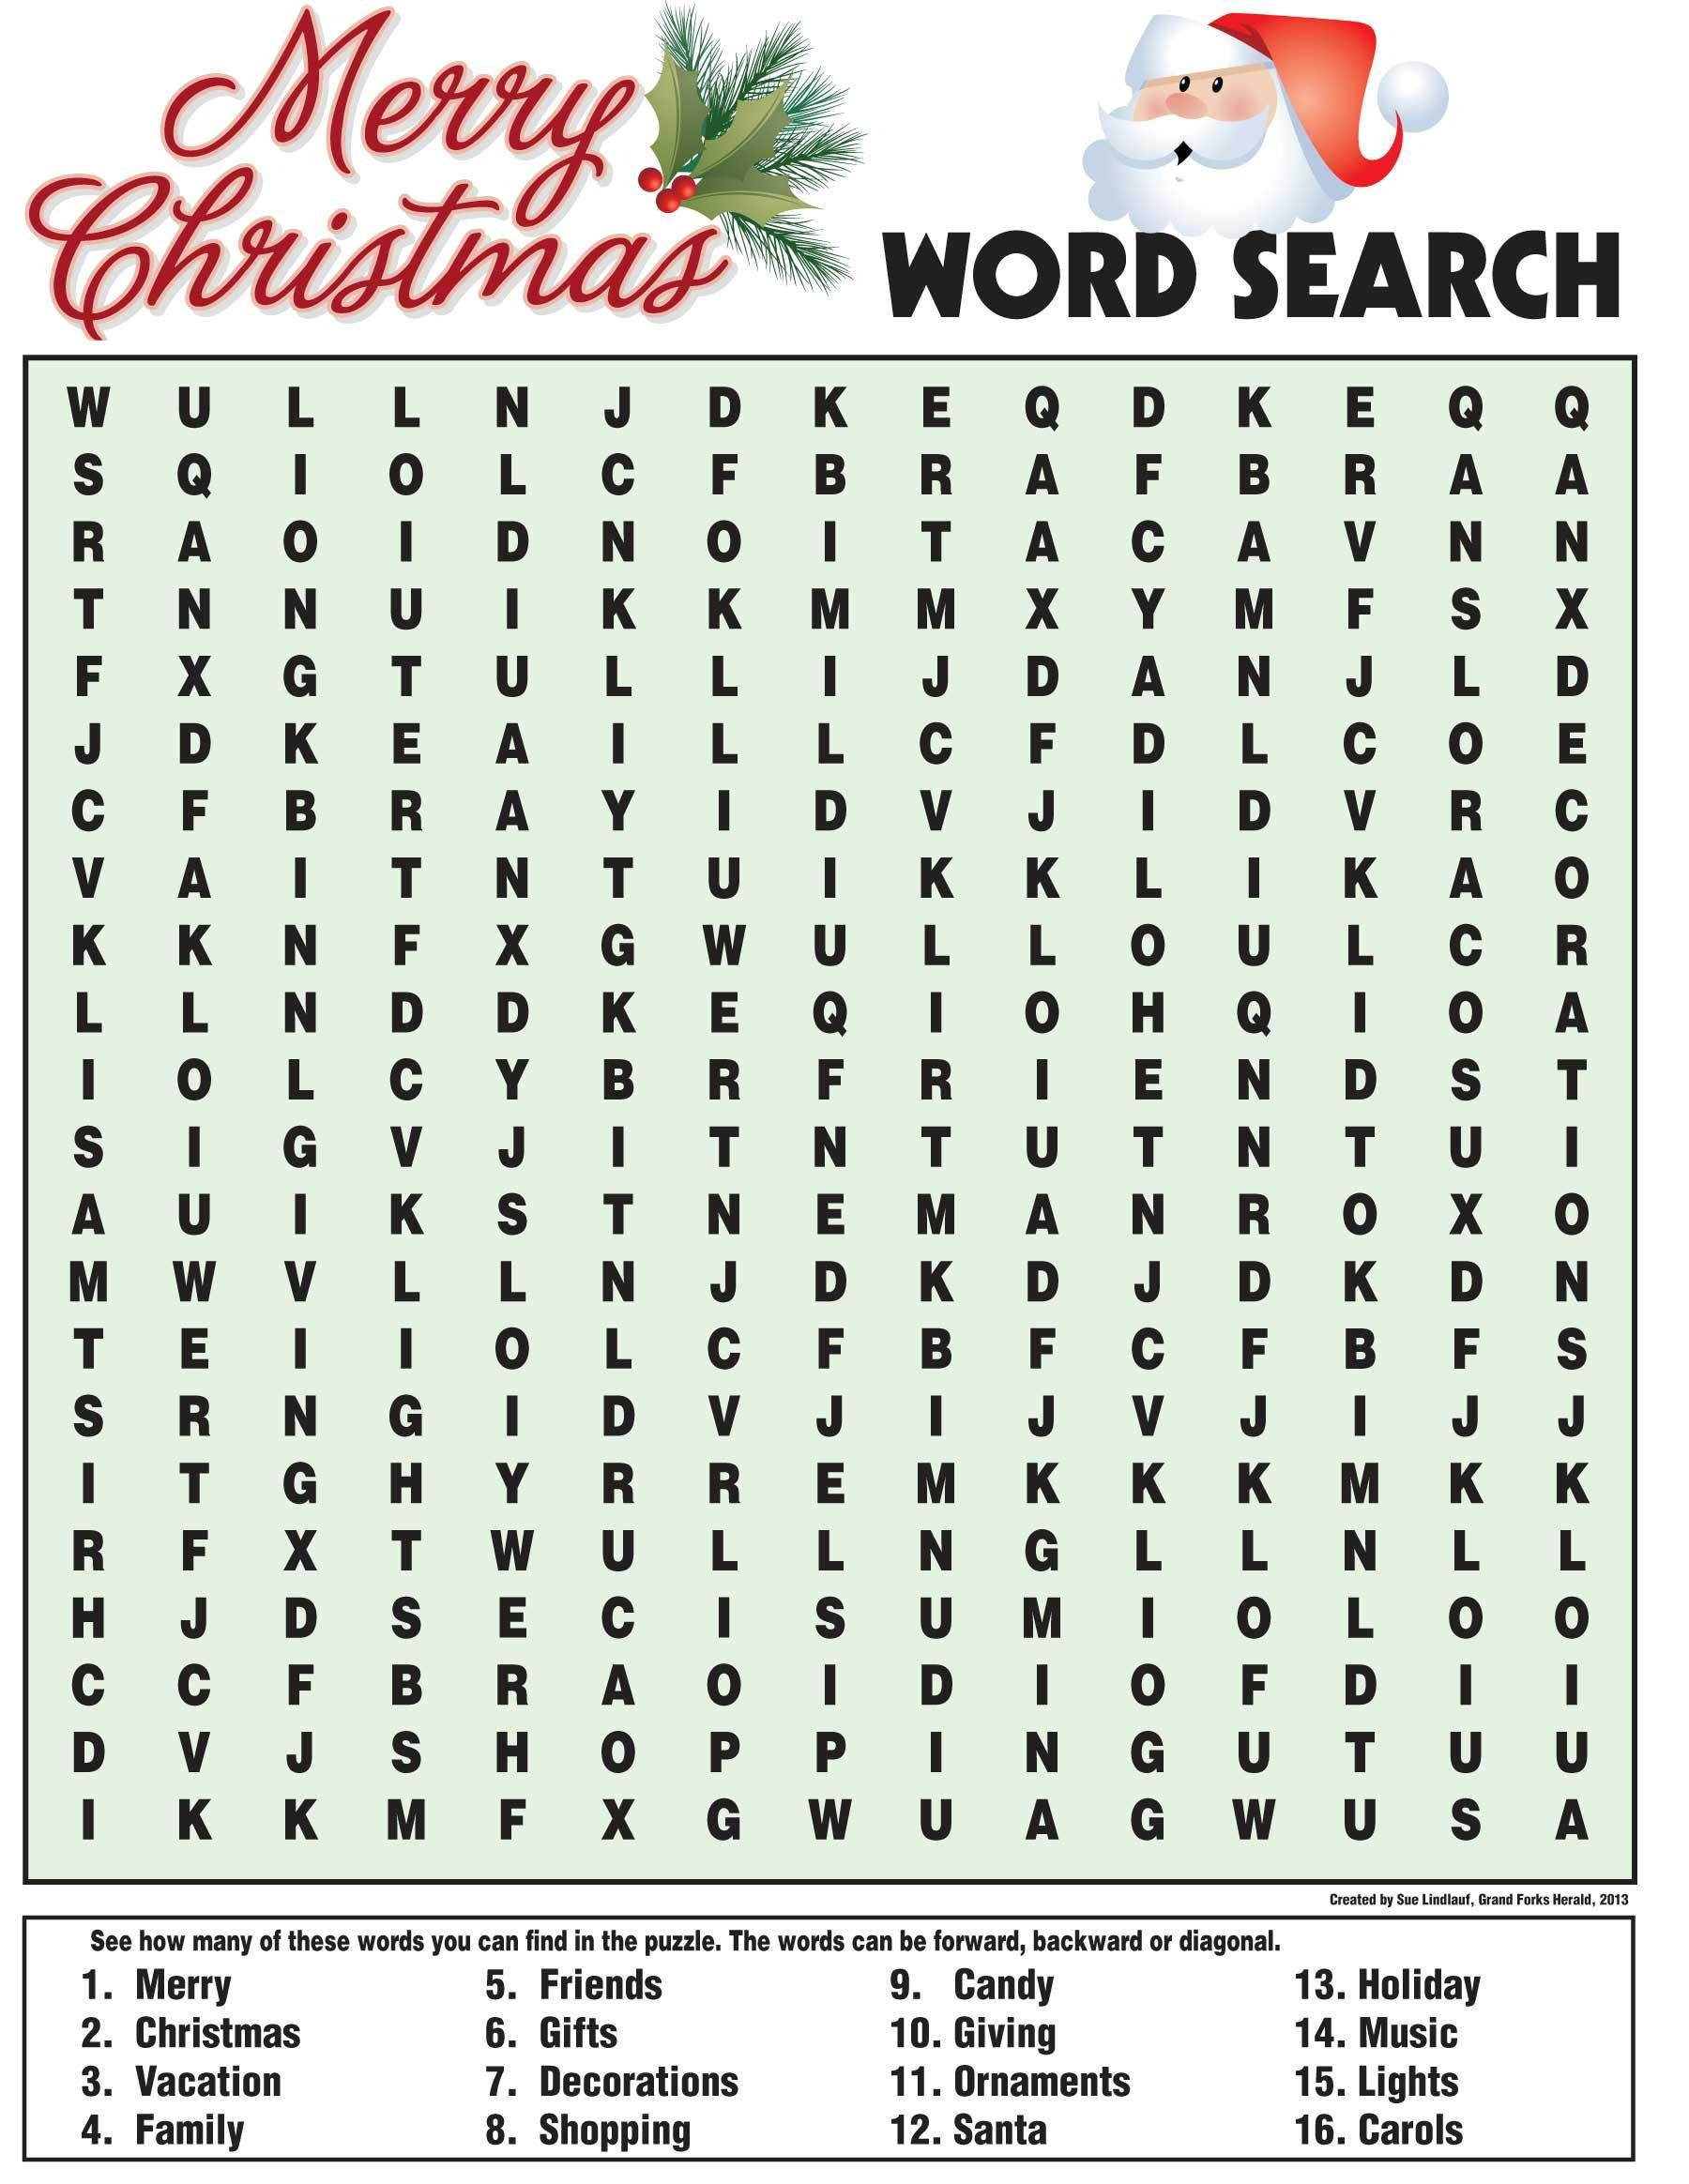 How Many Words Can You Find That Relate To Christmas In The